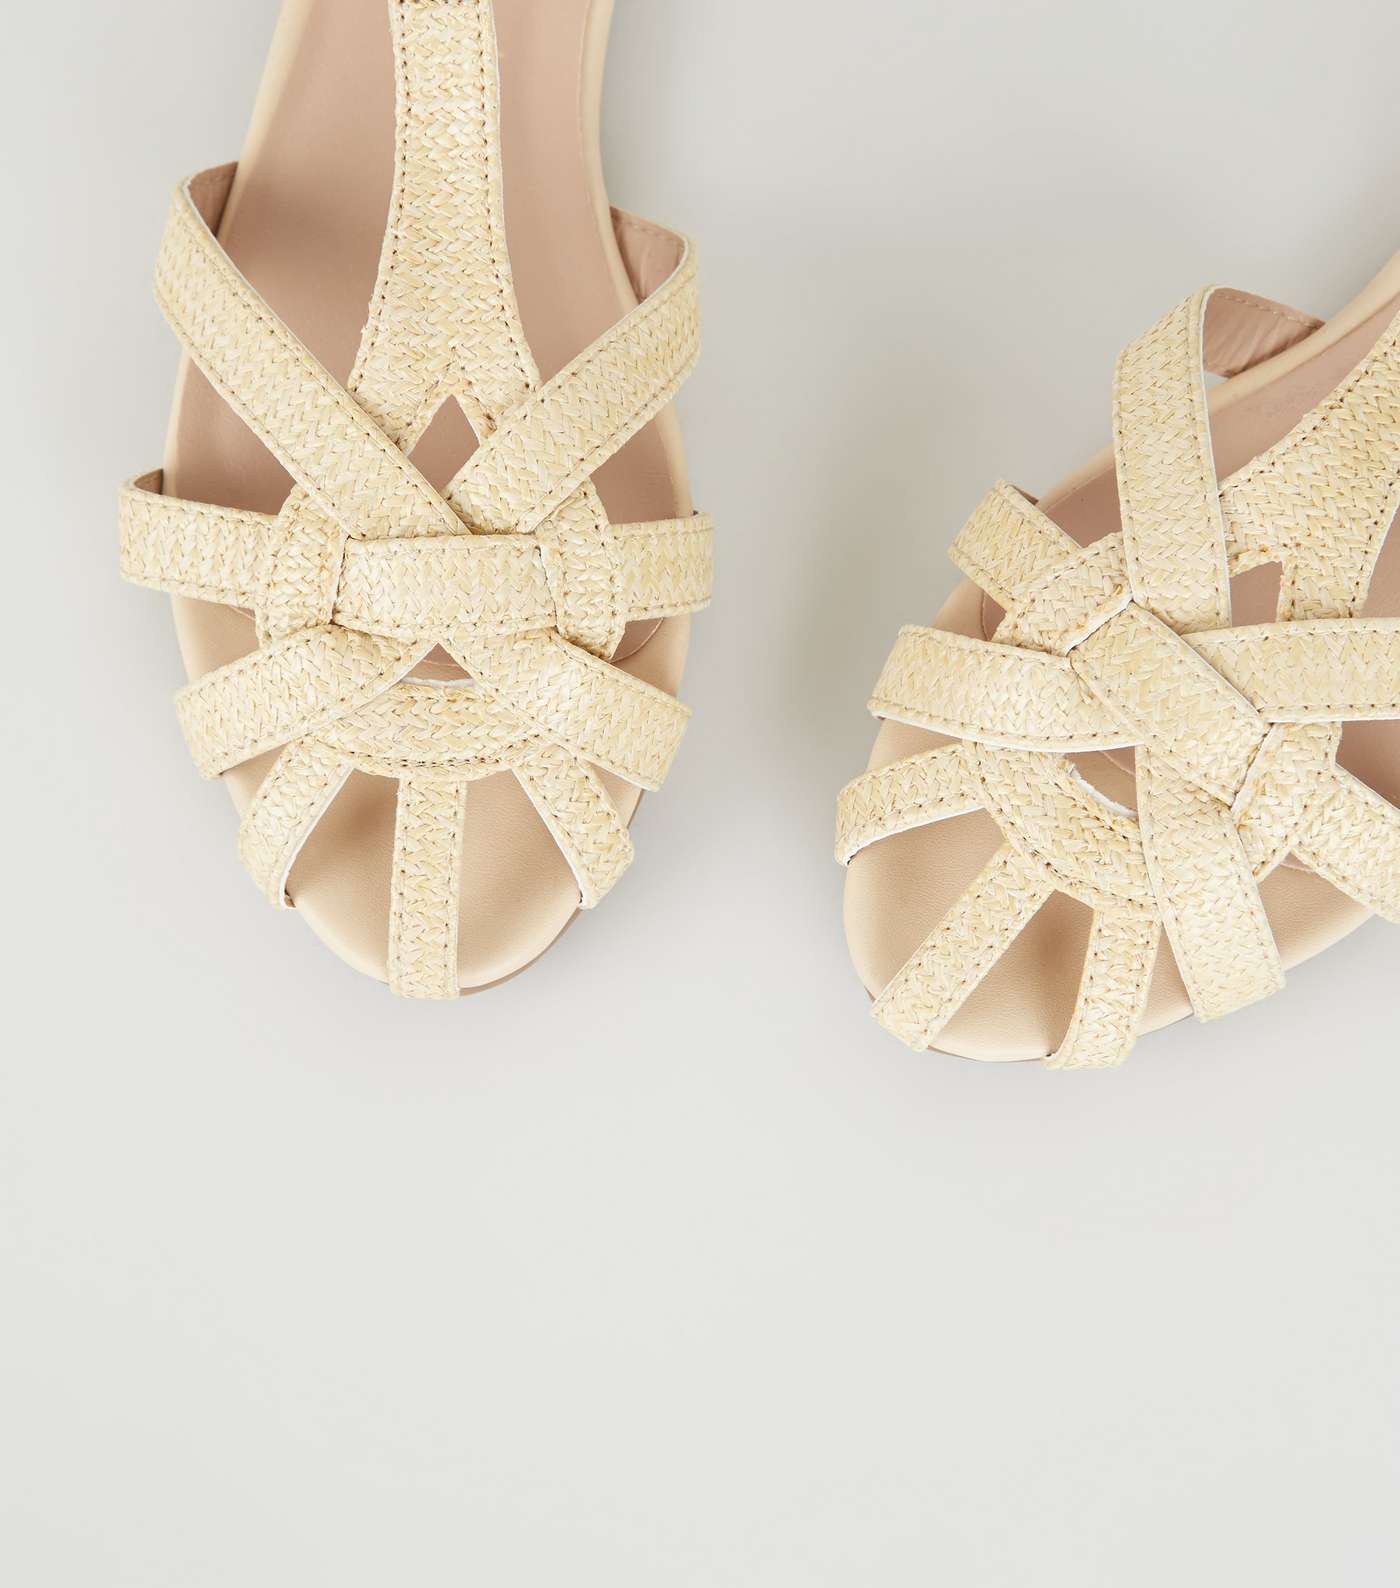 Cream Woven Straw Effect Caged Sandals Image 3